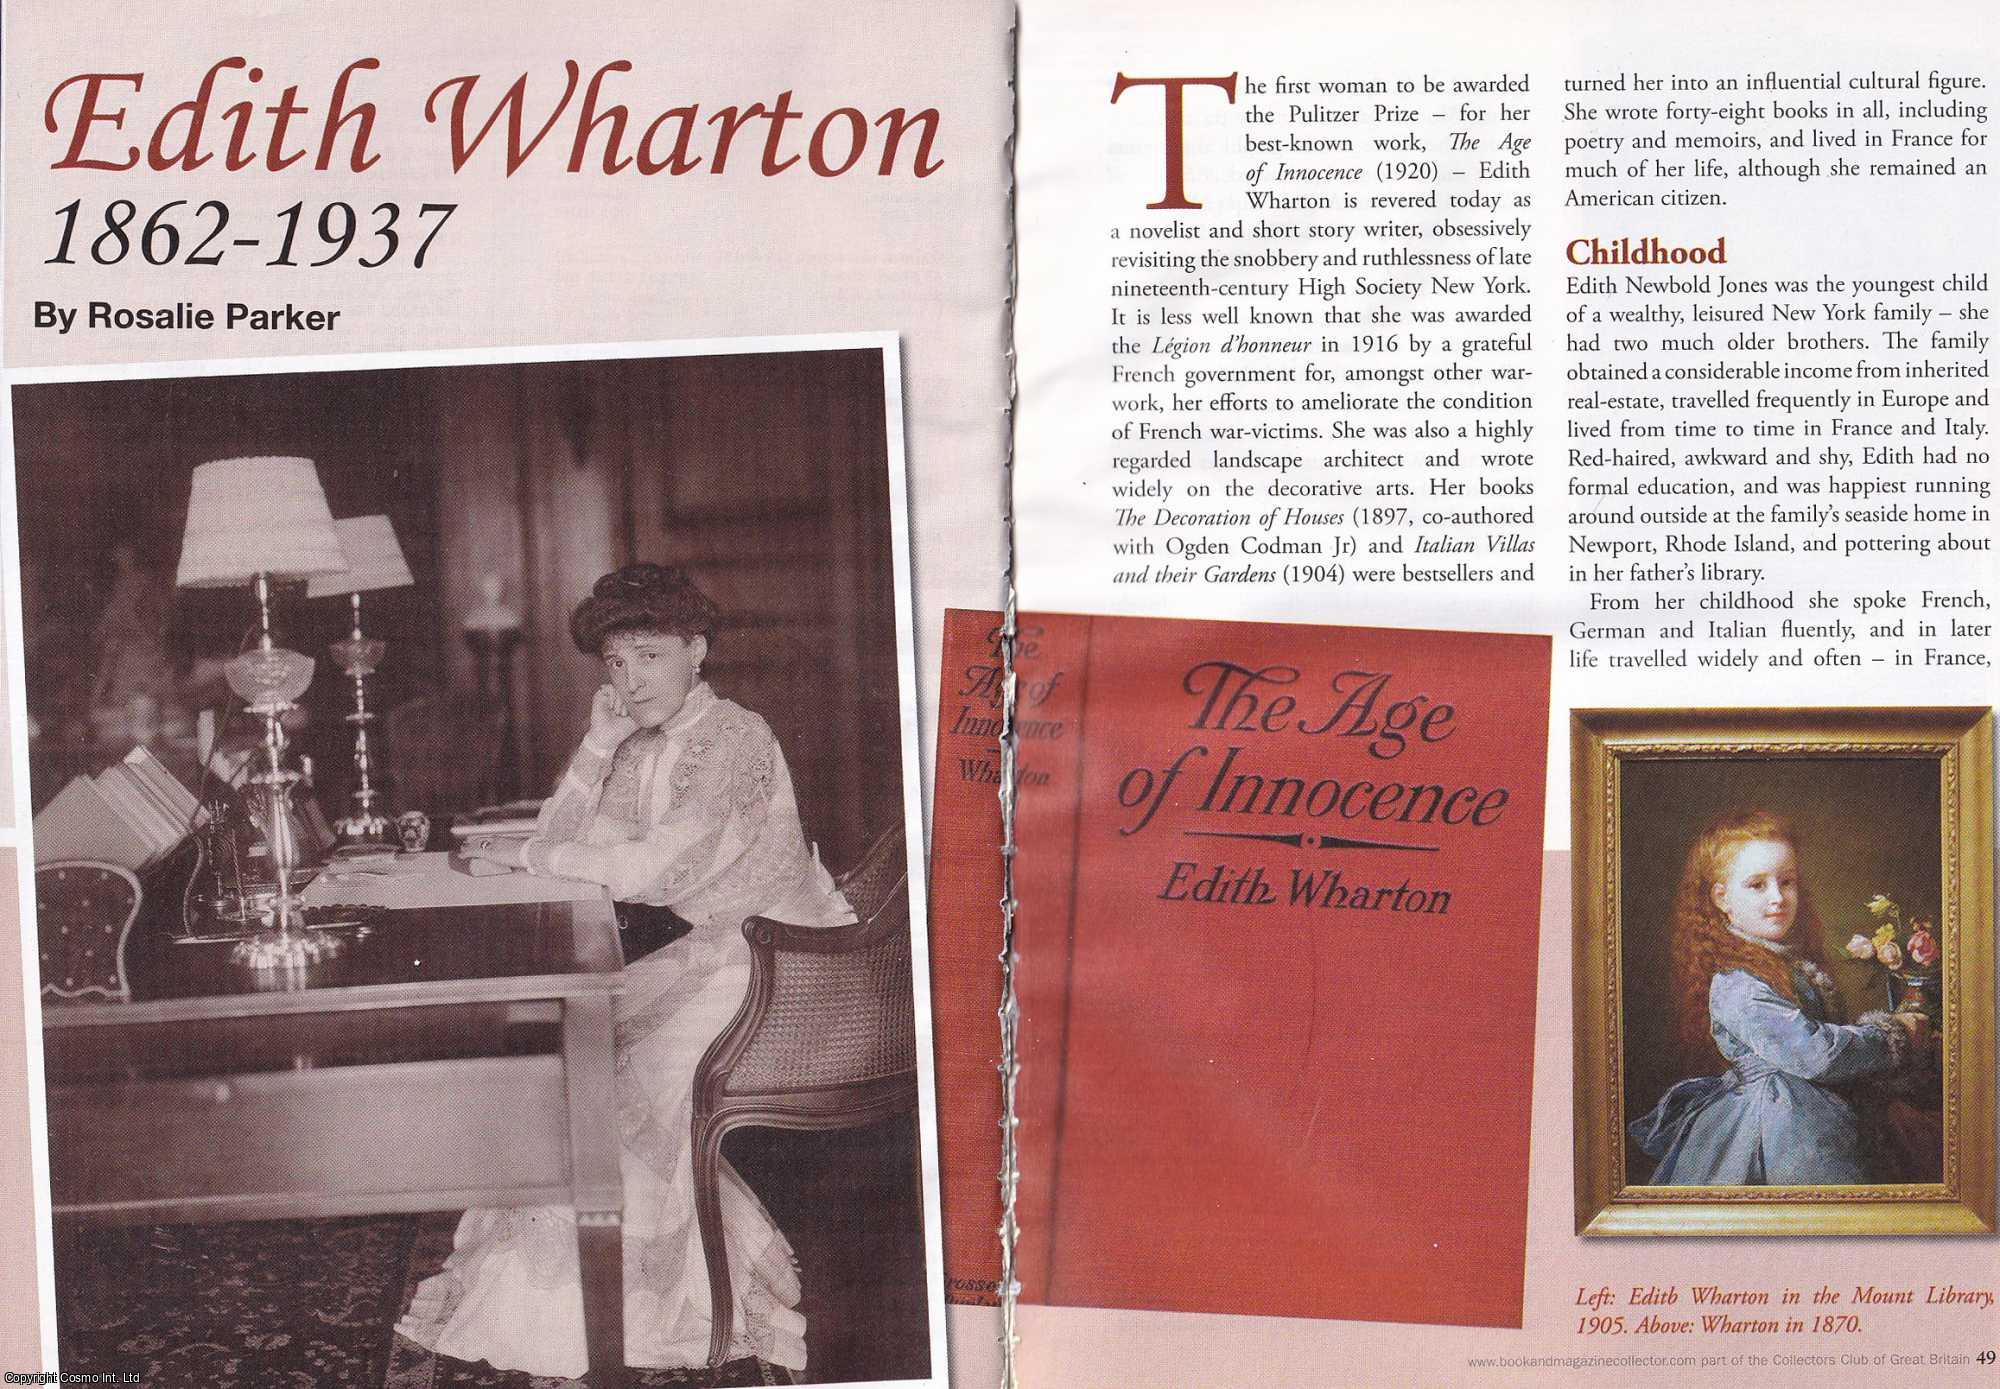 Rosalie Parker - Edith Wharton. 1862-1937. This is an original article separated from an issue of The Book & Magazine Collector publication.